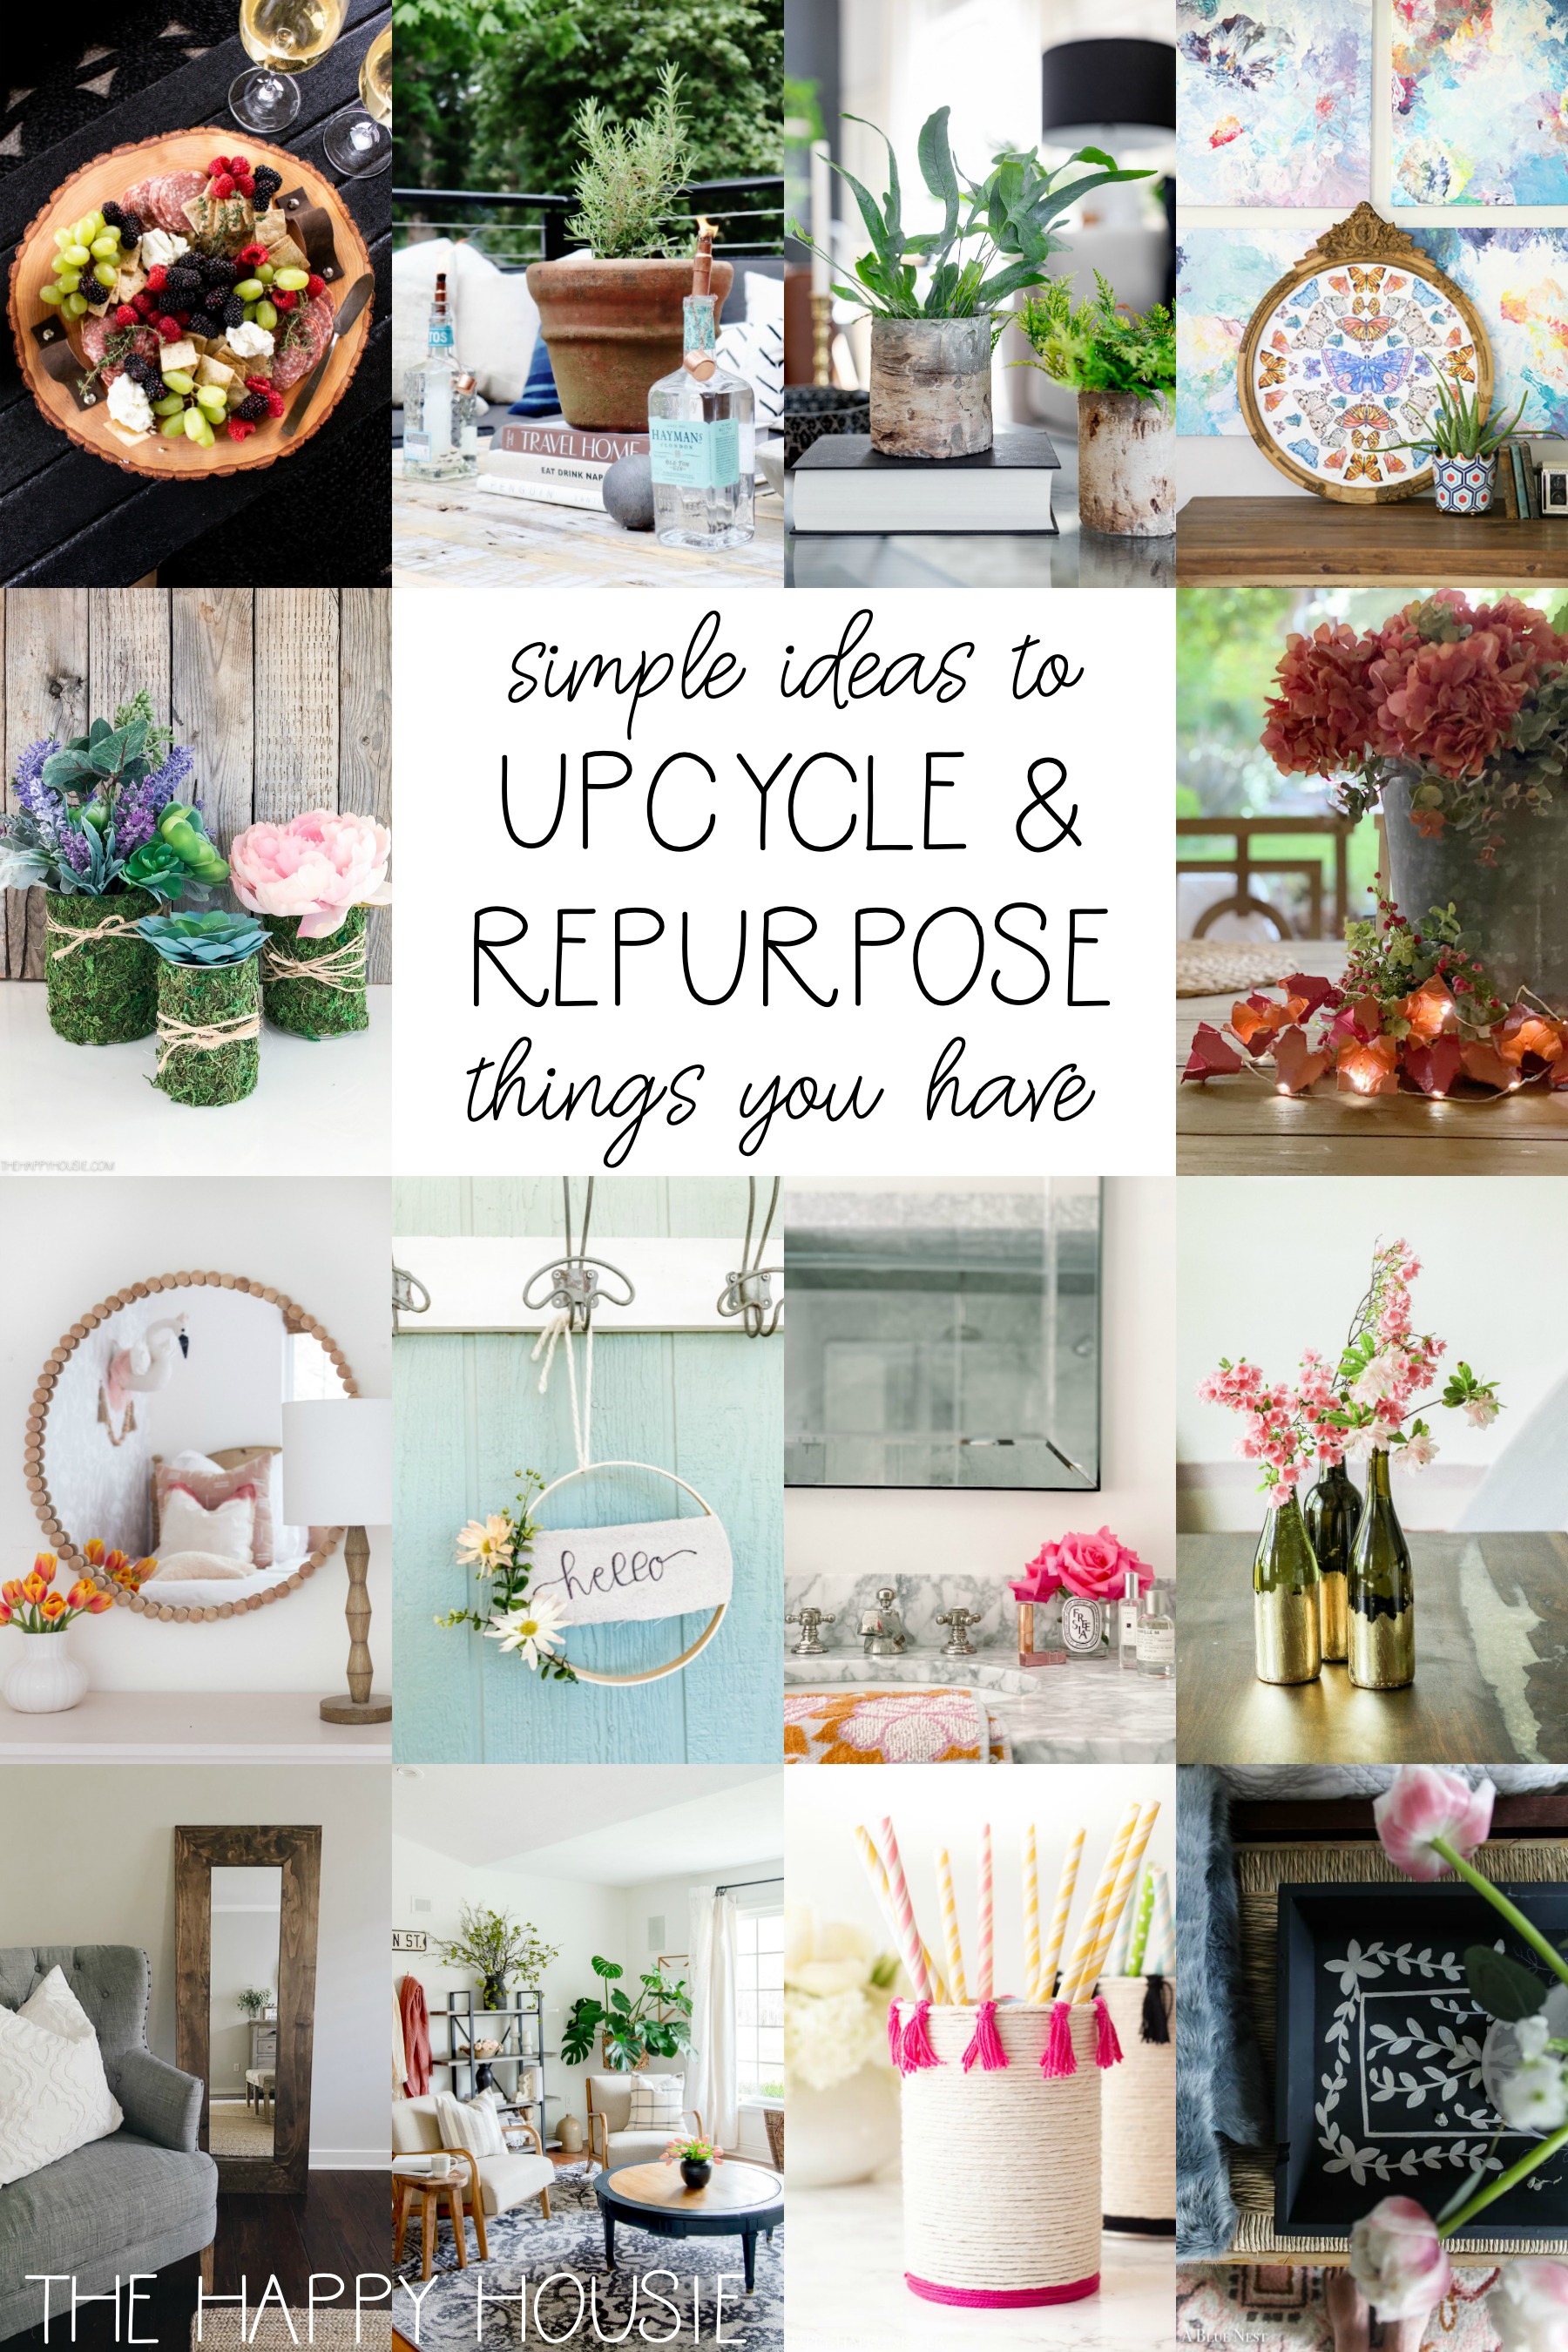 Simple ideas to Upcycle and repurpose poster.